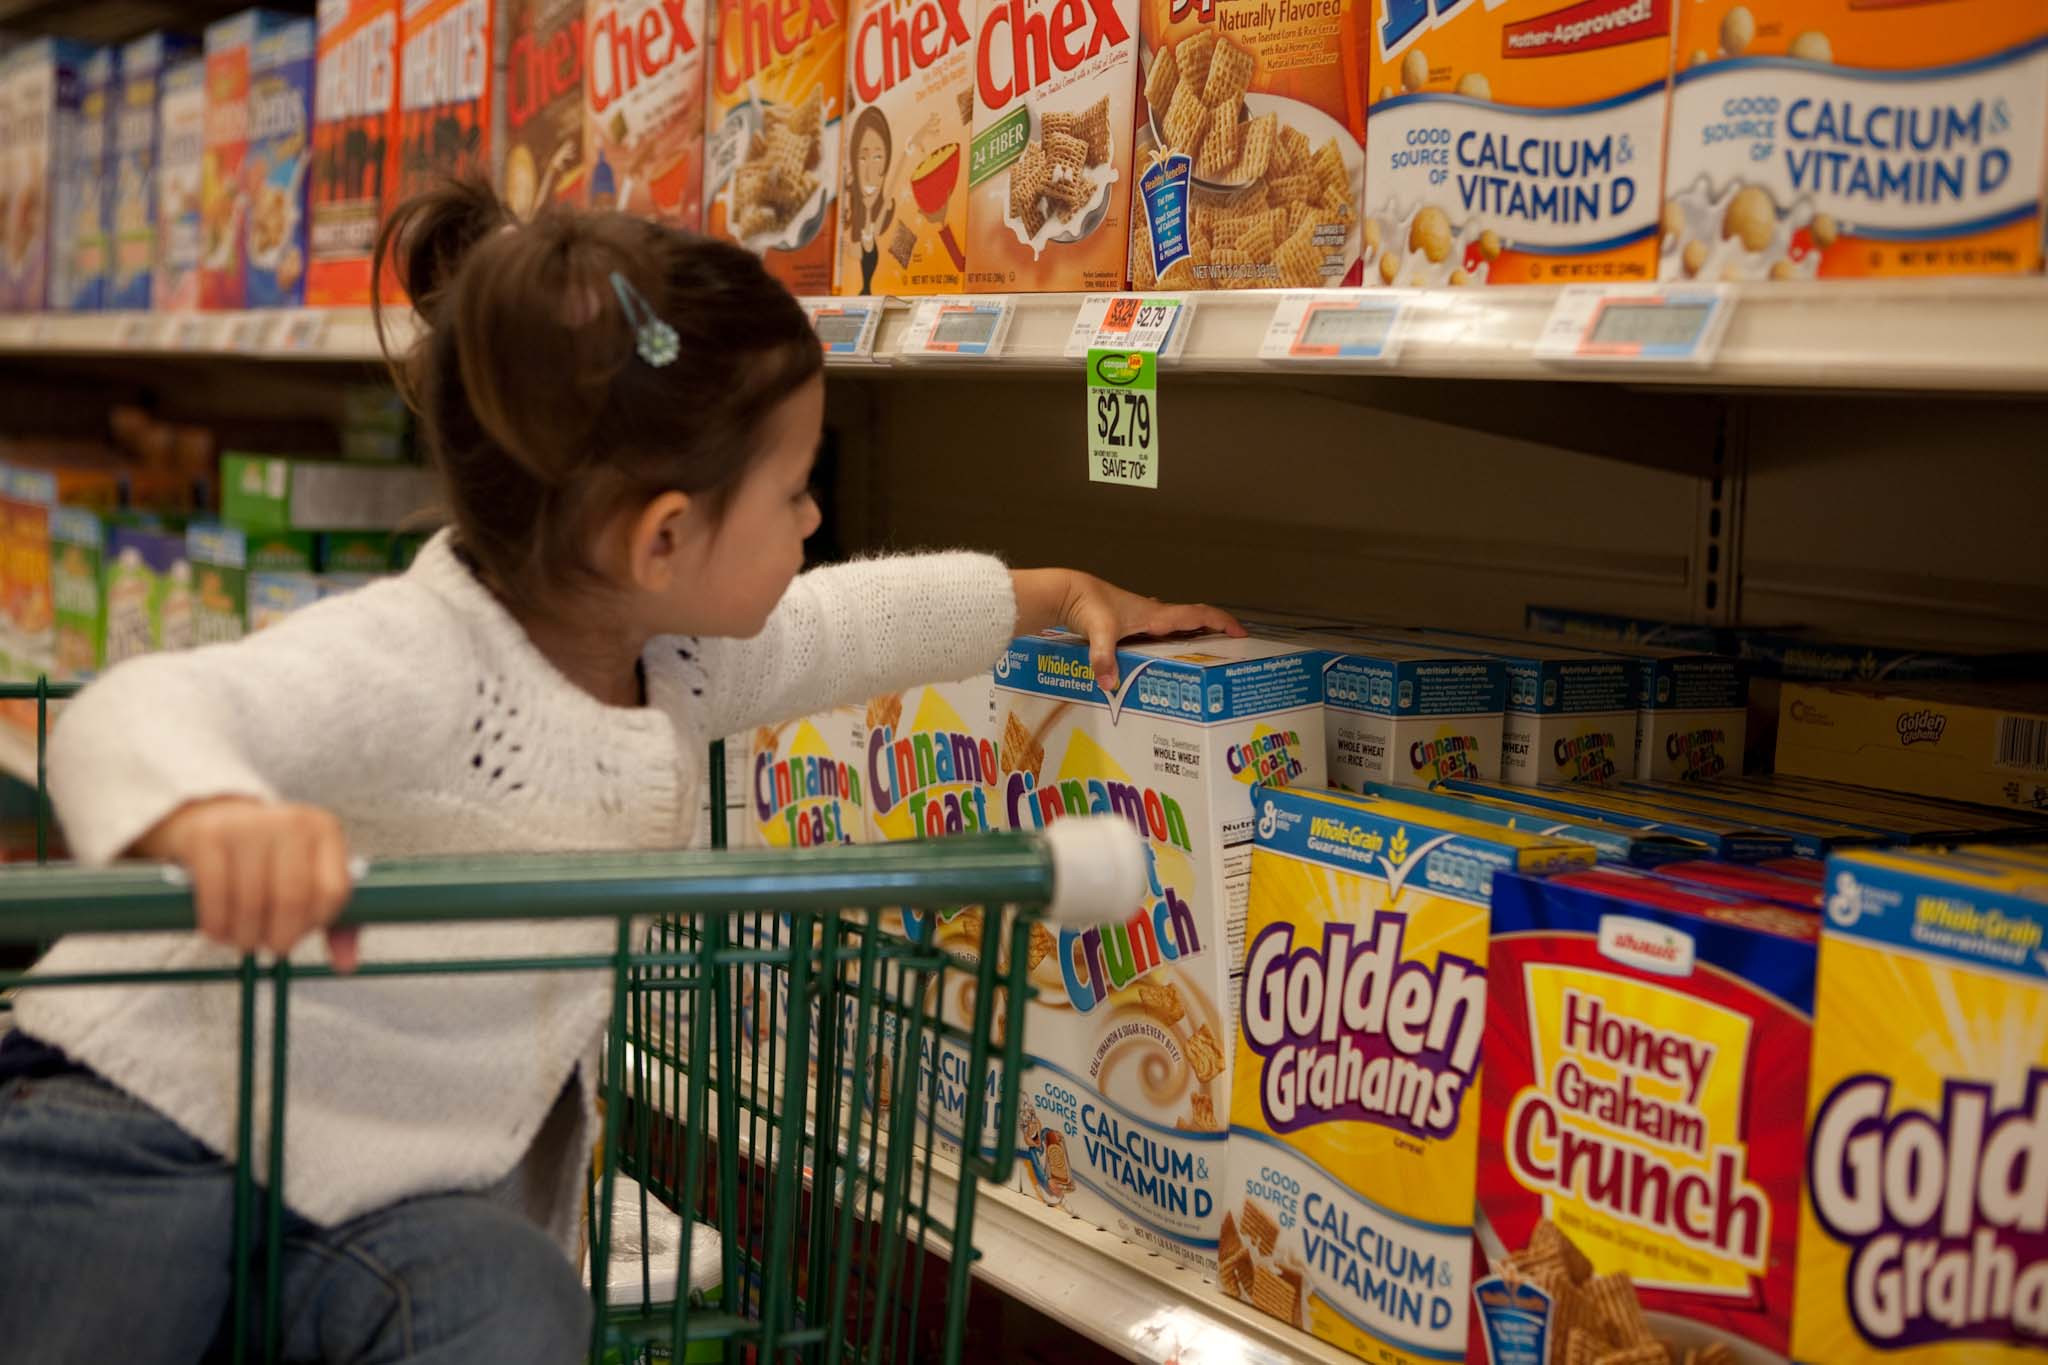 Toddler with hair clips wearing a white sweater and jeans grabbing a box of Cinnamon Toast Crunch off a supermarket shelf.